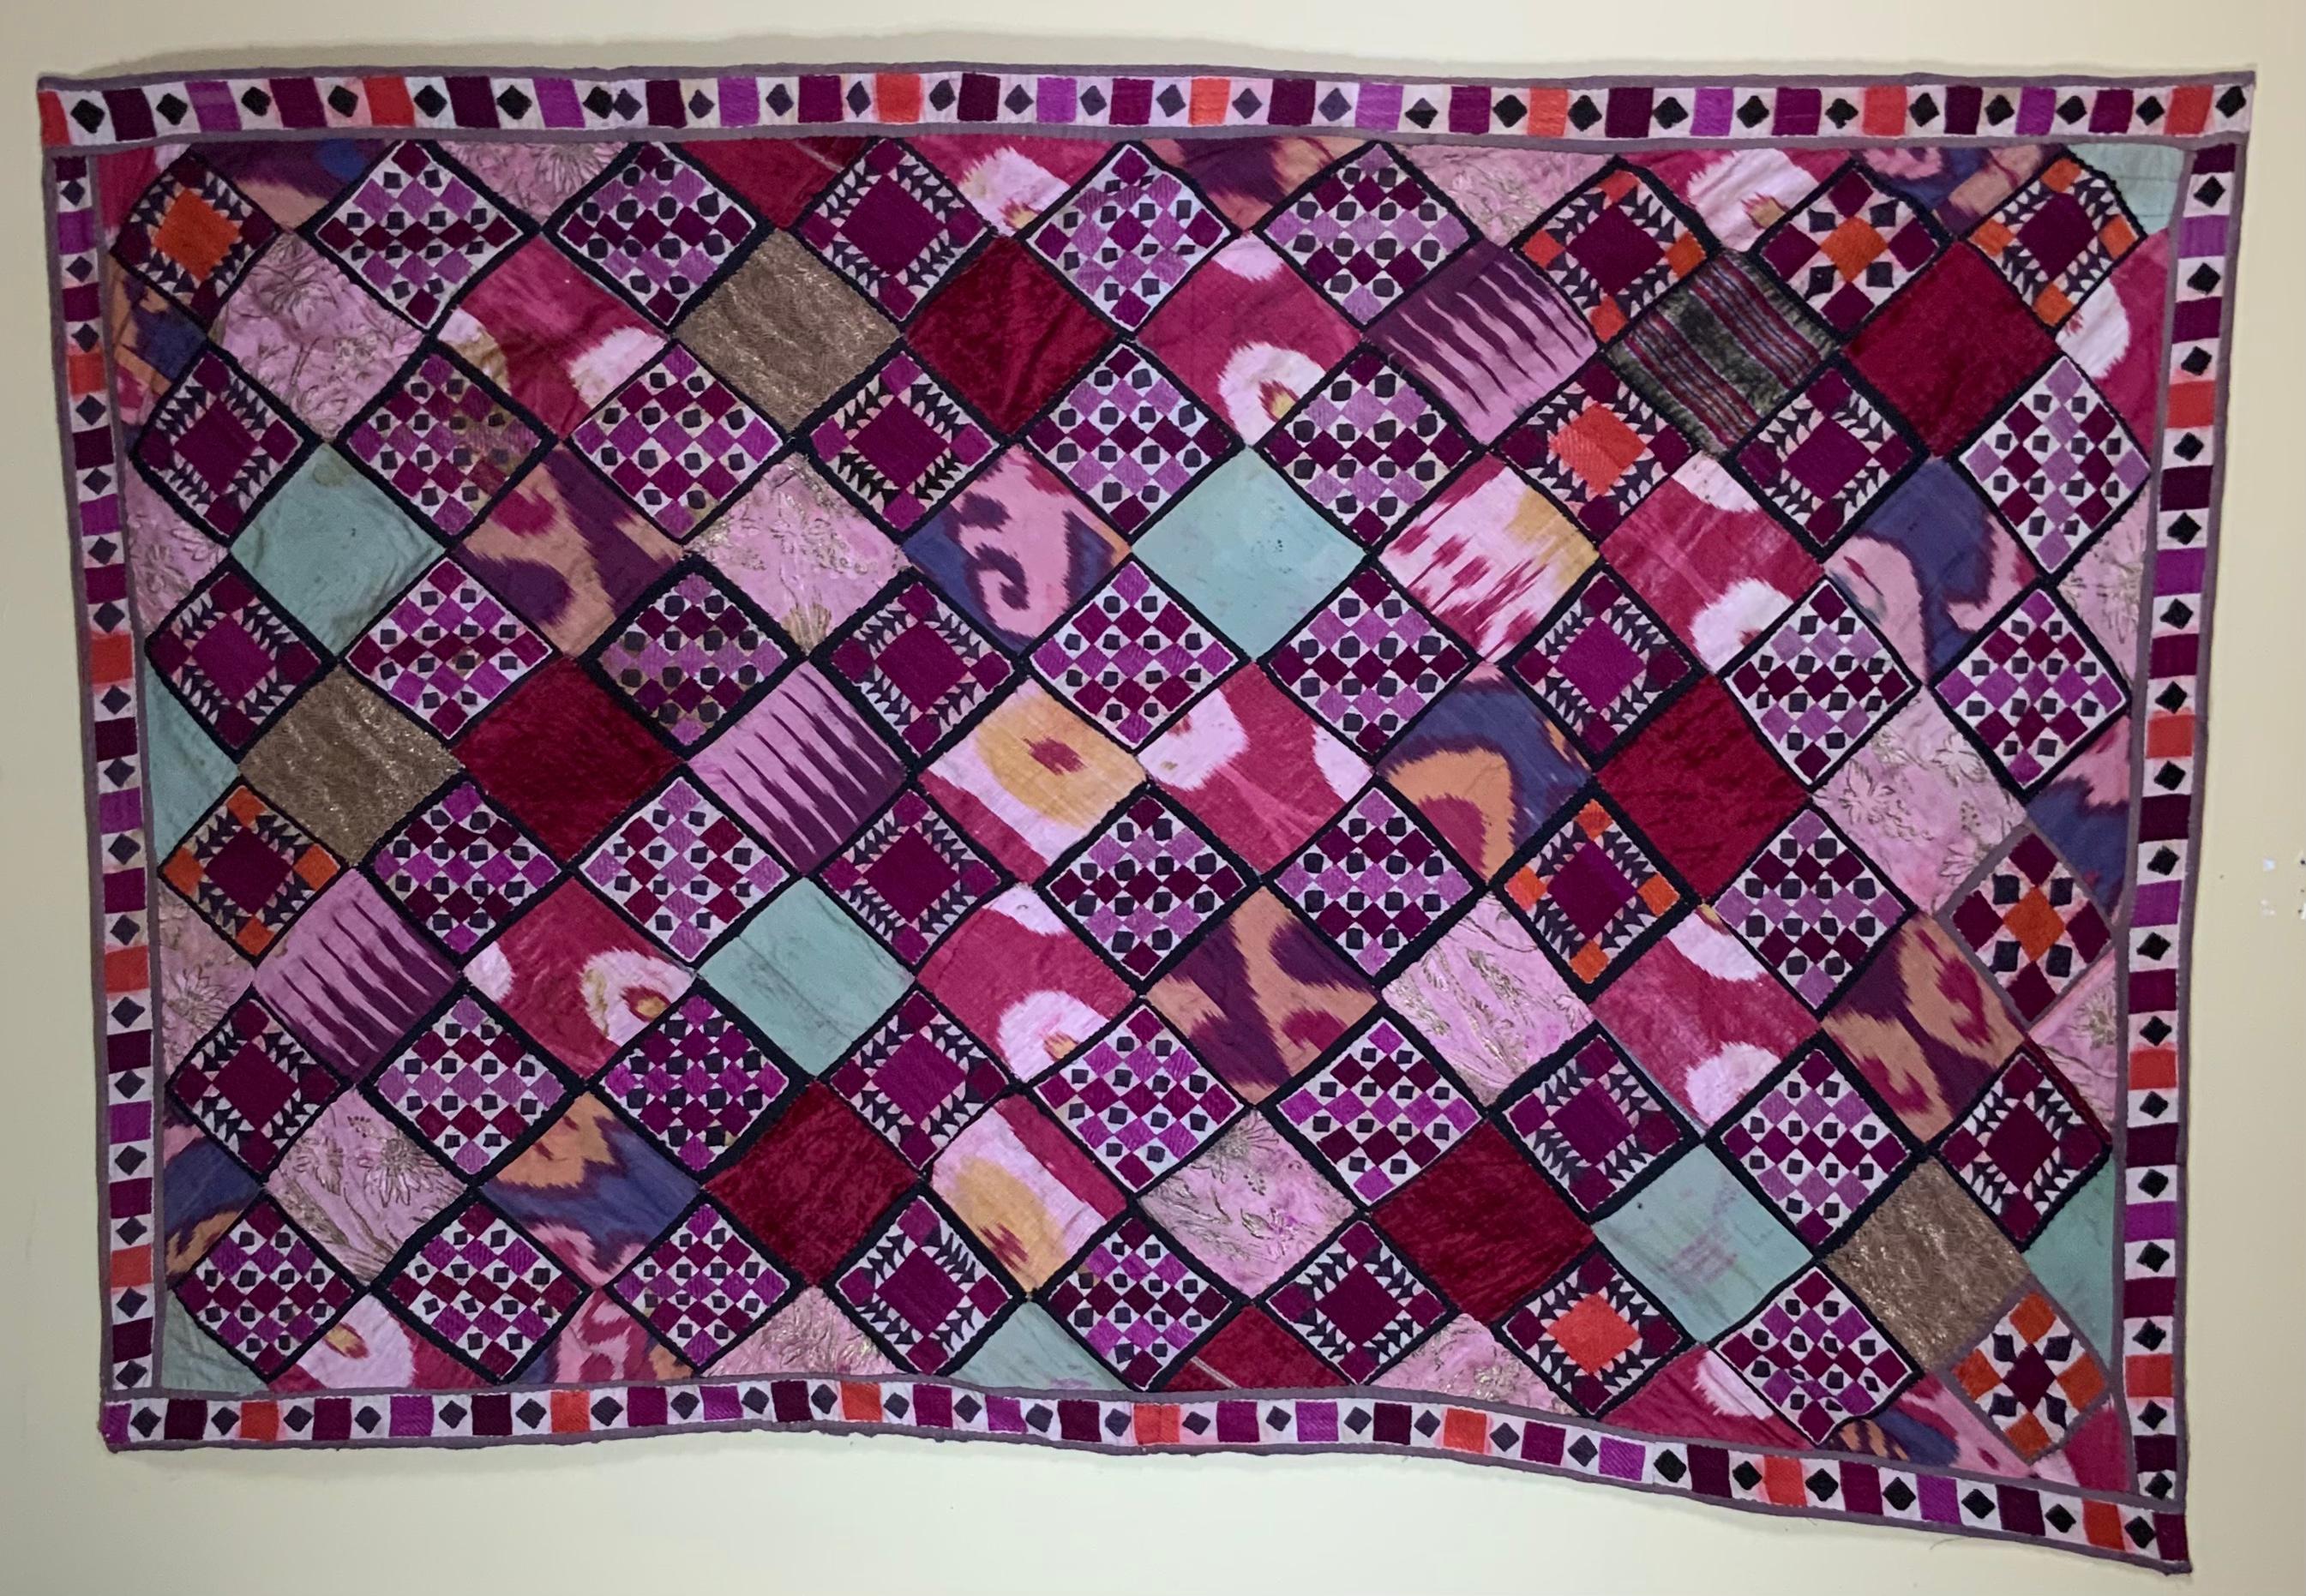 Antique Uzbek wall hanging made of combination of hand embroidery Suzani squares, silk Ikat, antique velvet and other textile all together with decorative Suzani border to become beautiful and intriguing nomadic piece of hand made work.